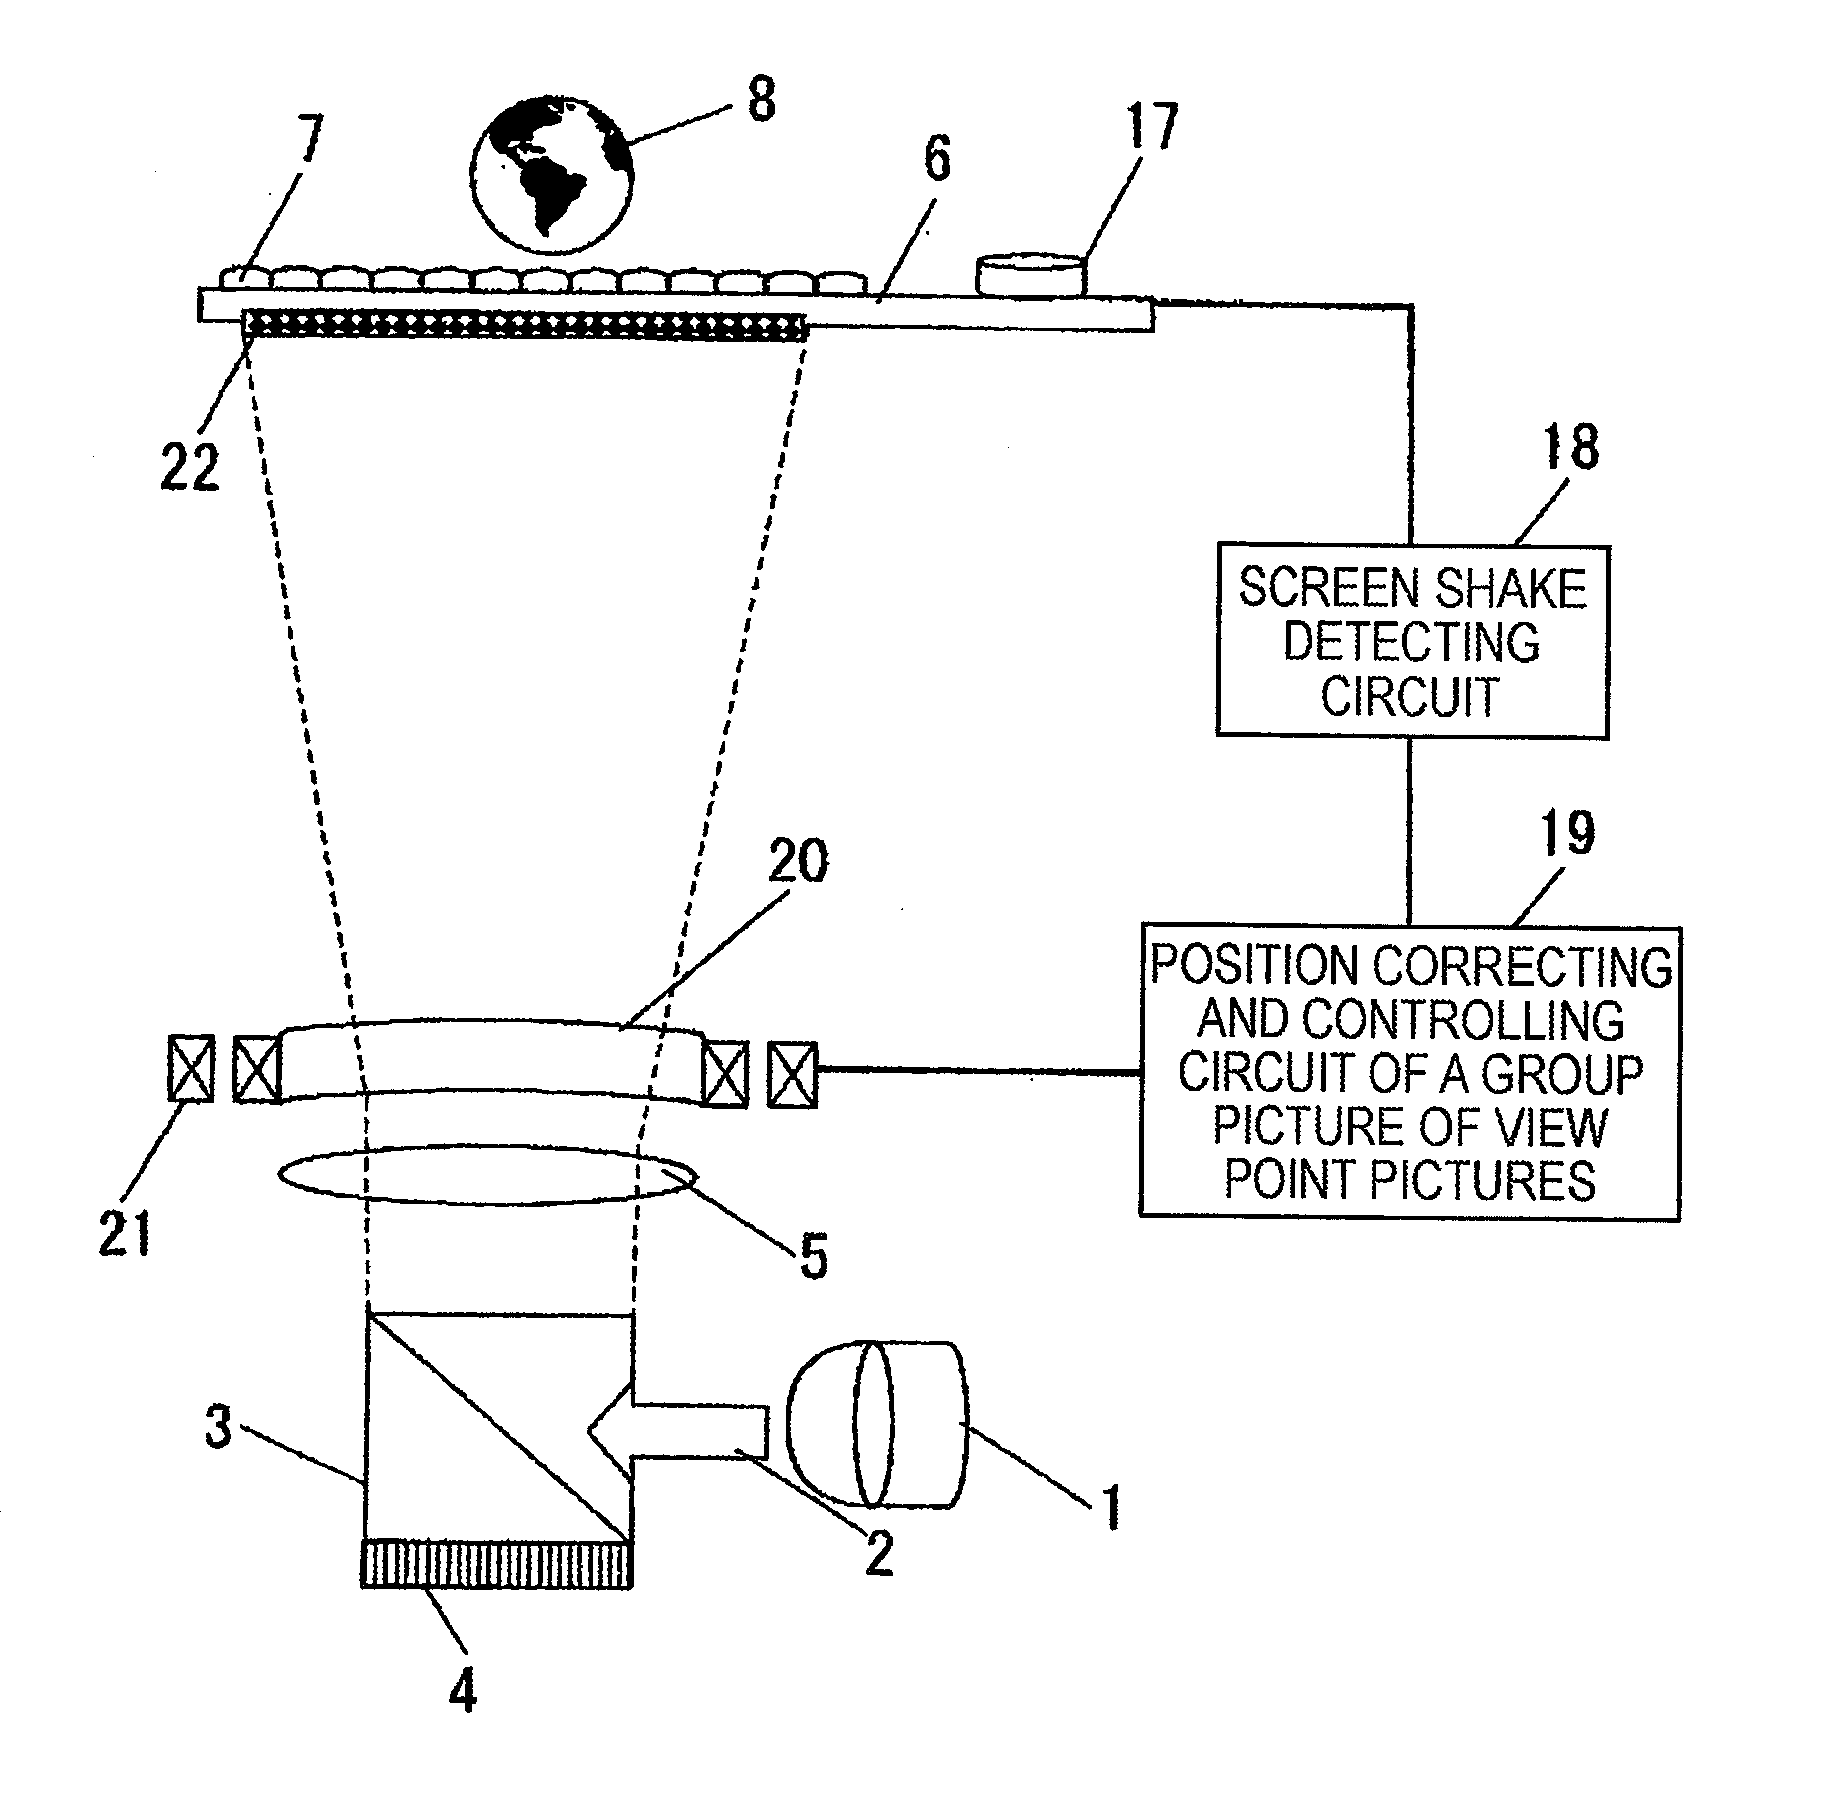 Projection three-dimensional display apparatus